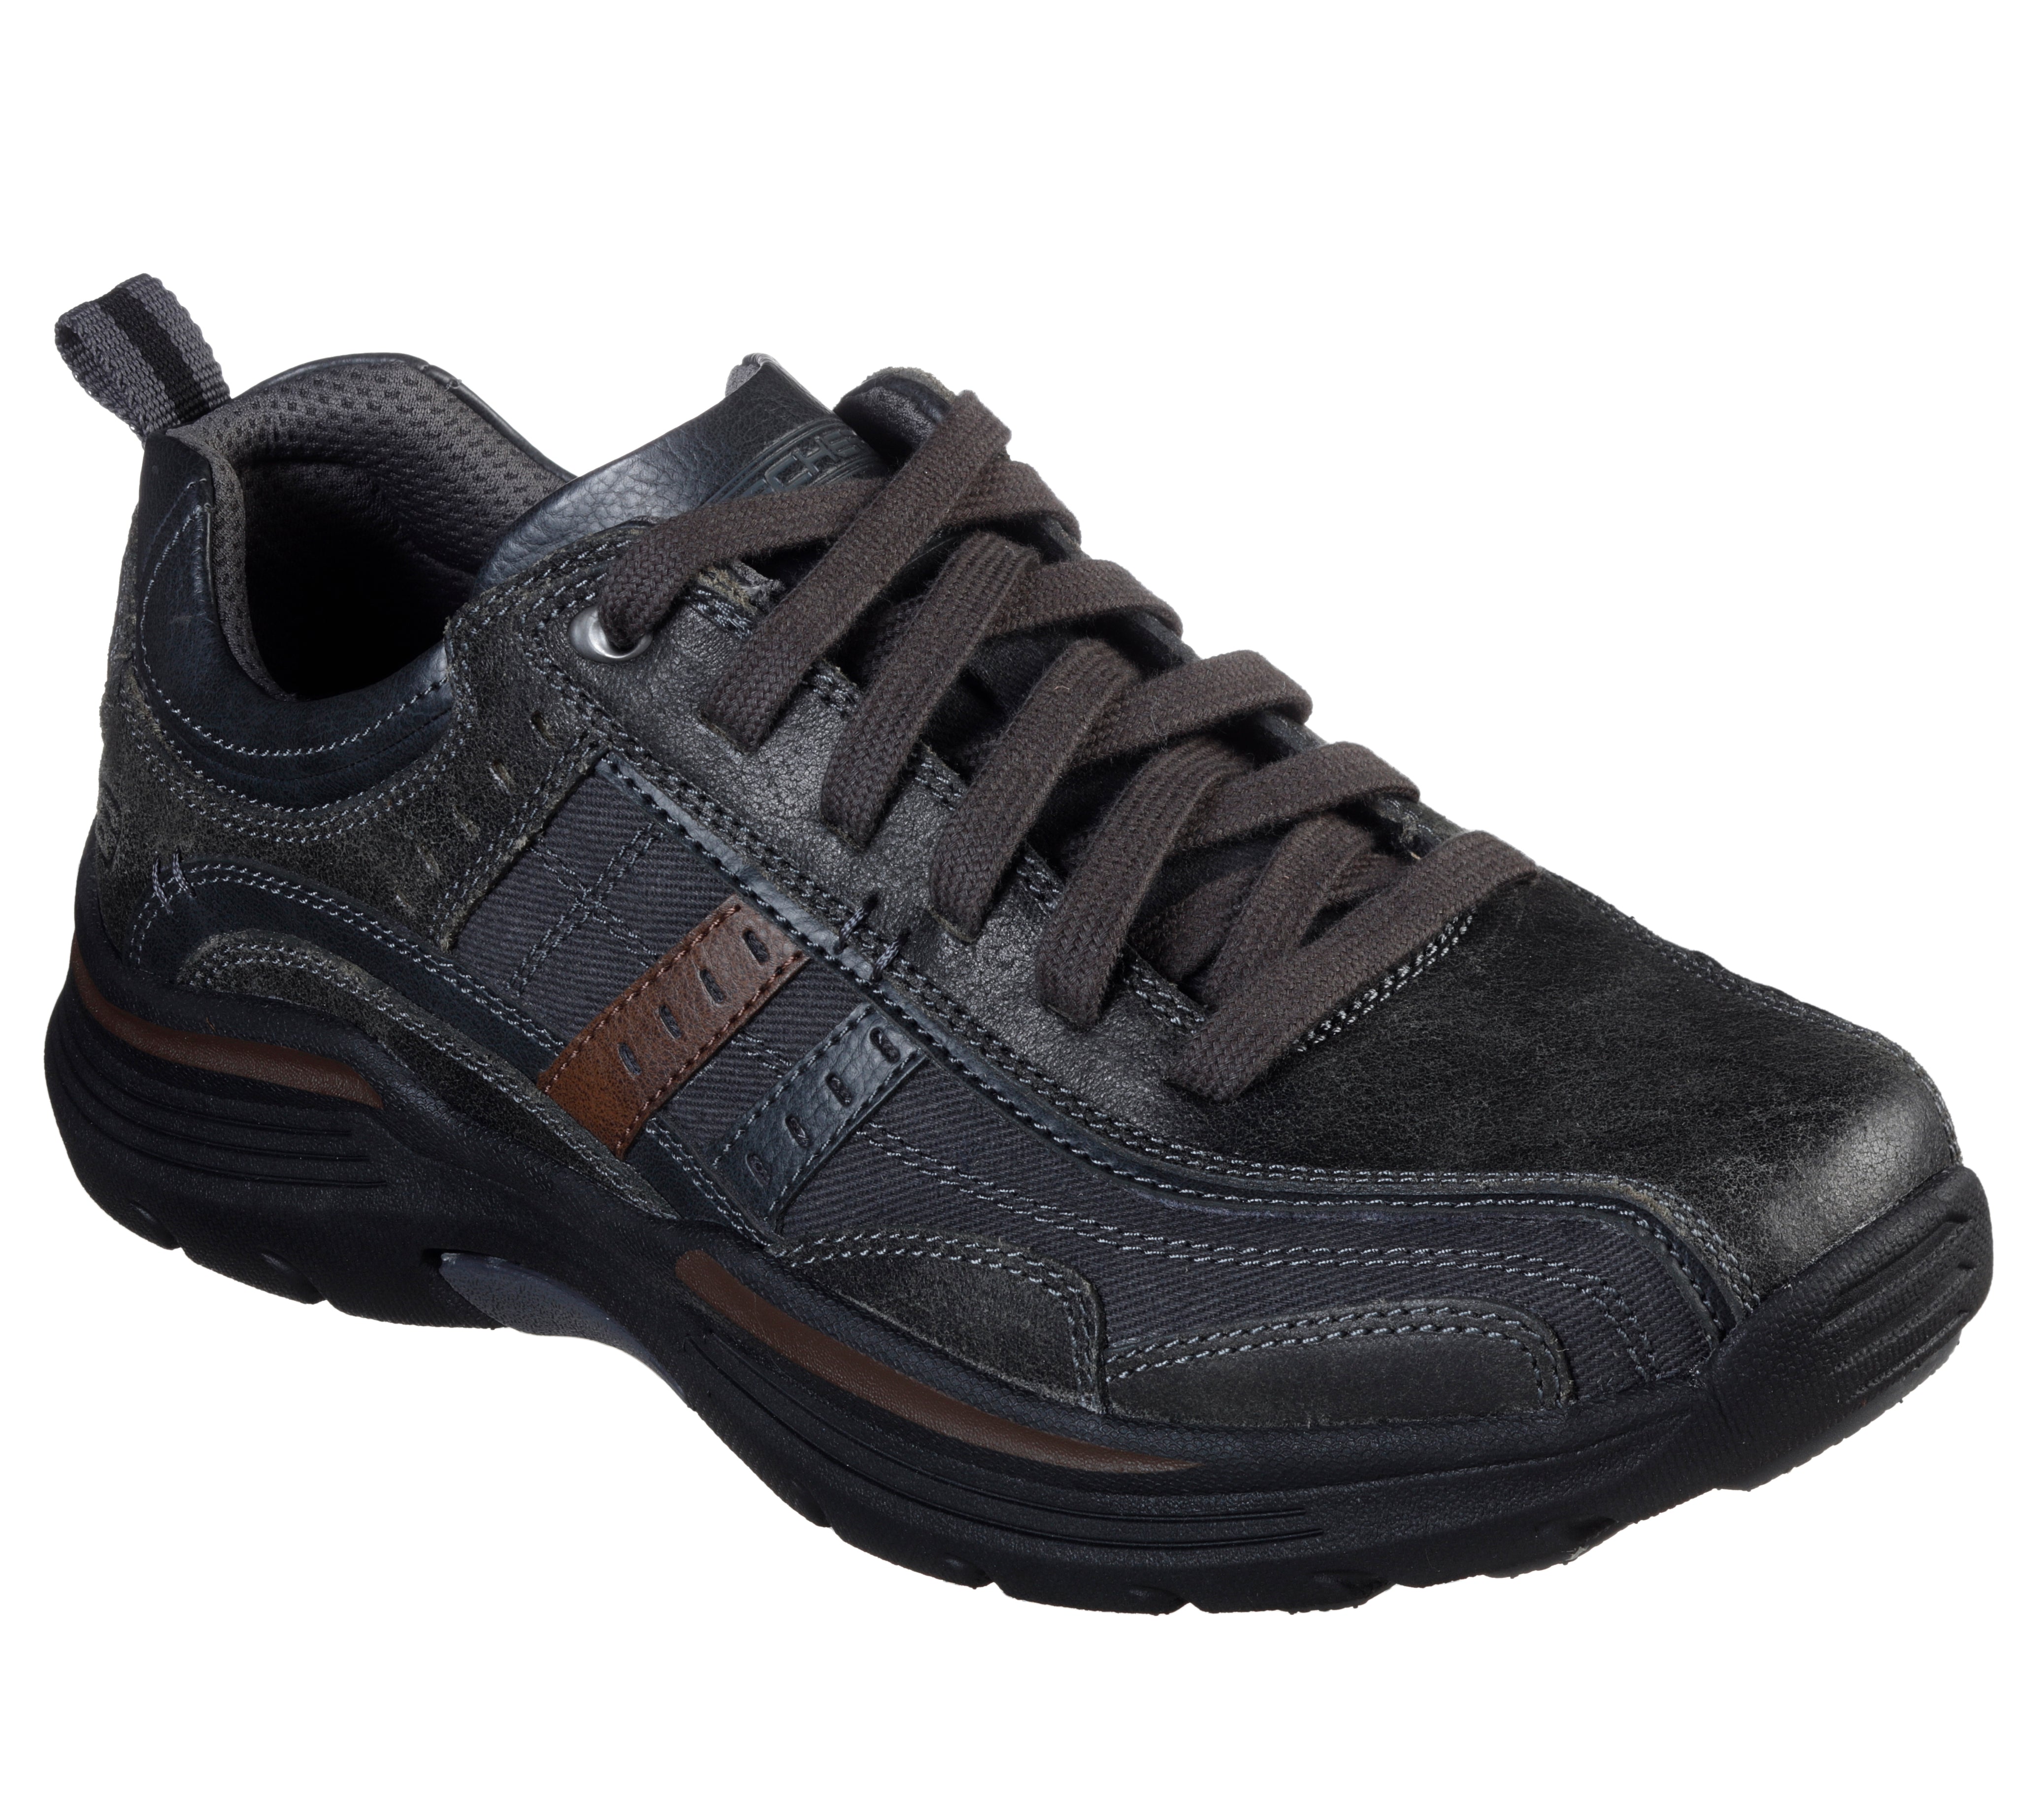 Skechers' Men's Expended Manden Lace Up 